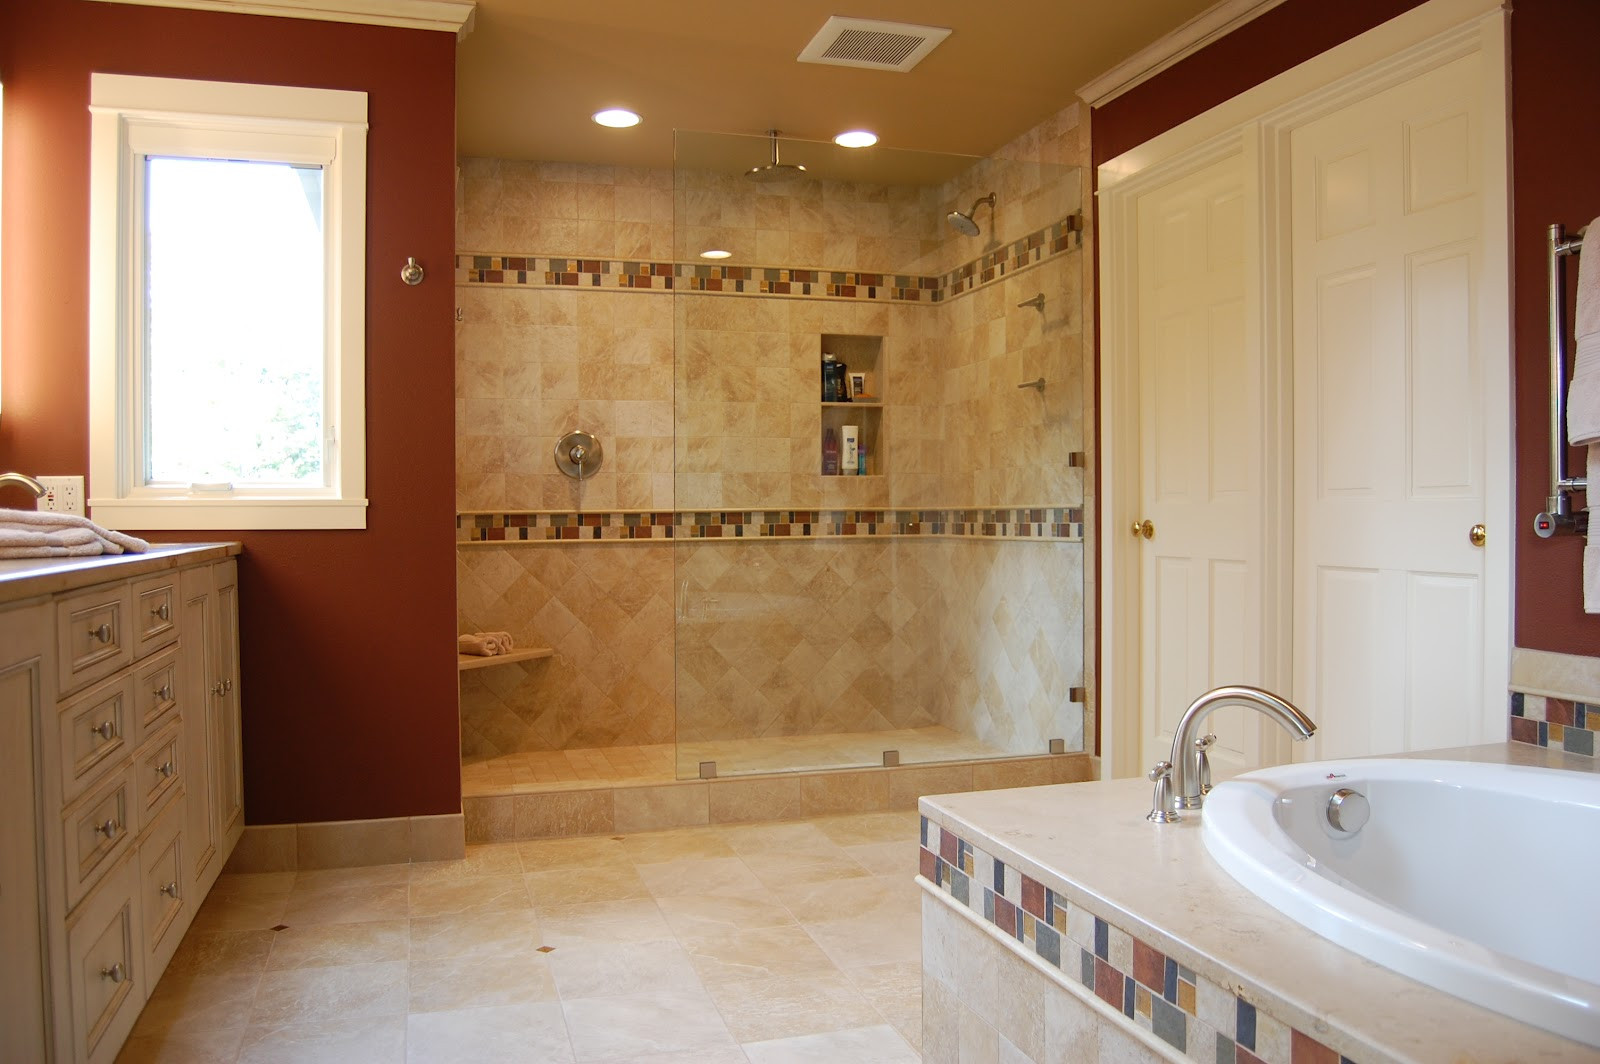 Remodeling Bathroom Ideas
 Here Are Some of The Best Bathroom Remodel Ideas You Can